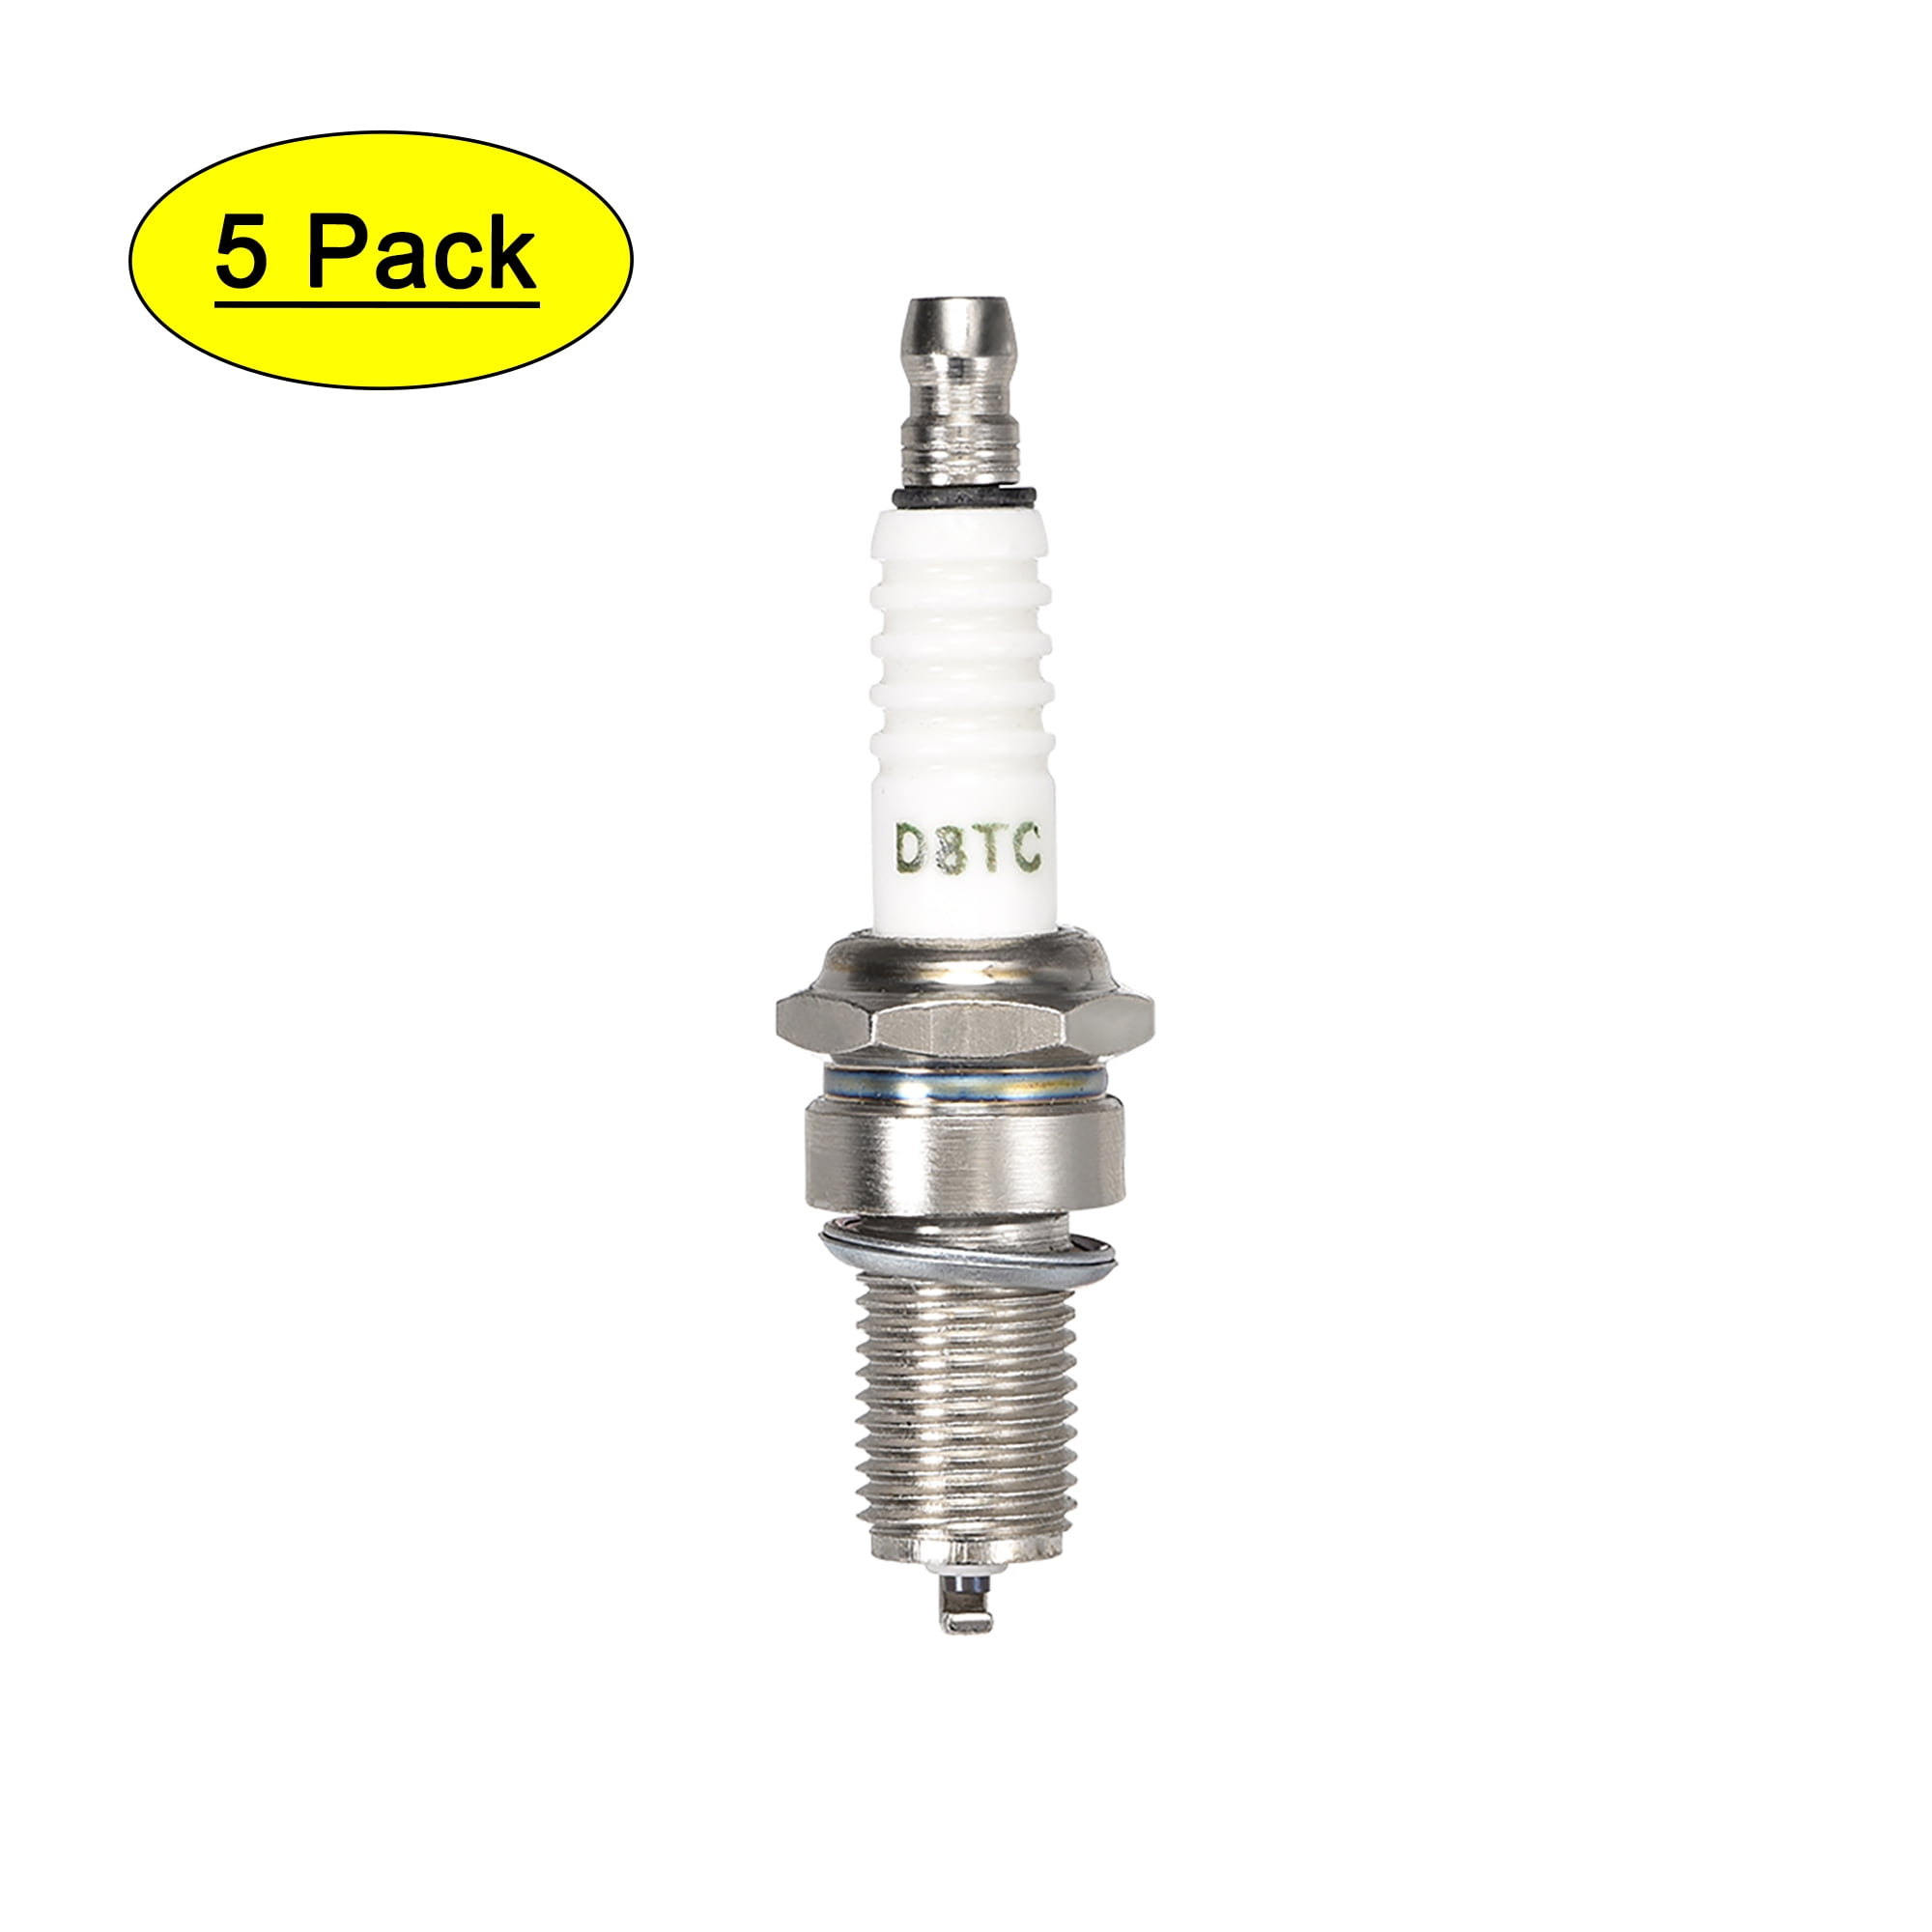 WOOSTAR D8TC Spark Plug with 3 Electrode Replacement for 4 Stroke 125cc 150cc 200cc 250cc ATV Dirt Bike Go Kart Moped Scooter Pack of 4 